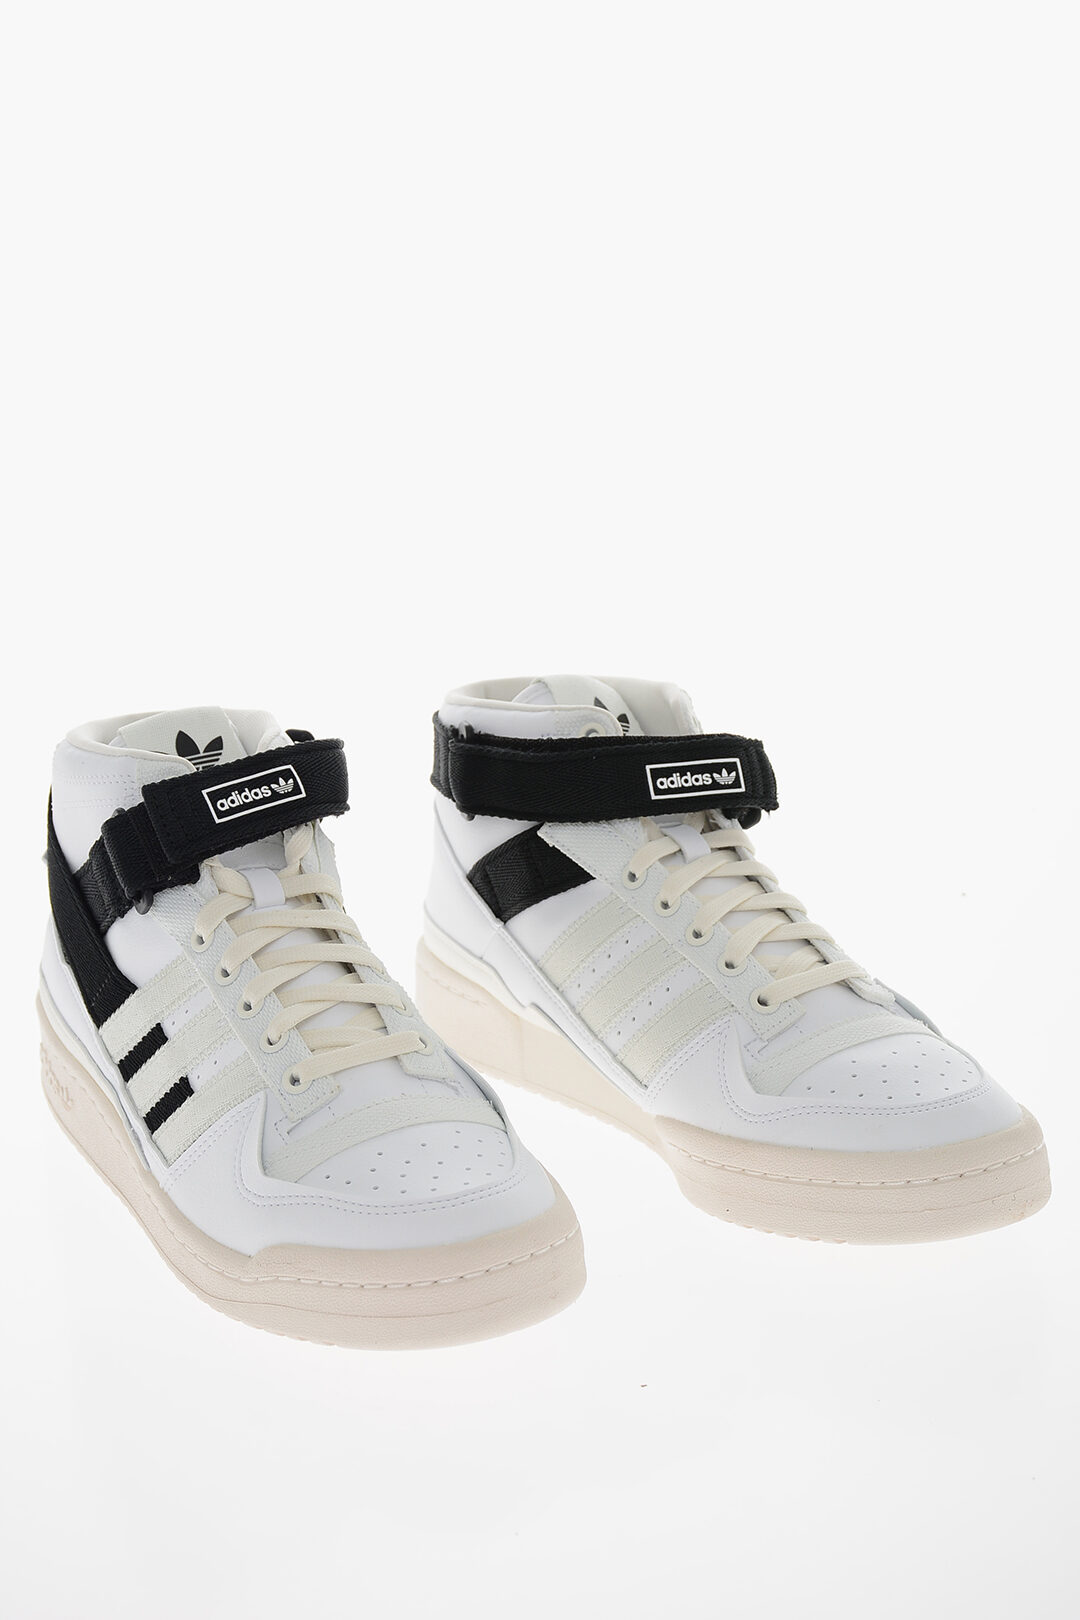 Adidas Two-Tone MID High-Top Sneakers with Touch and Laces Closure men - Glamood Outlet